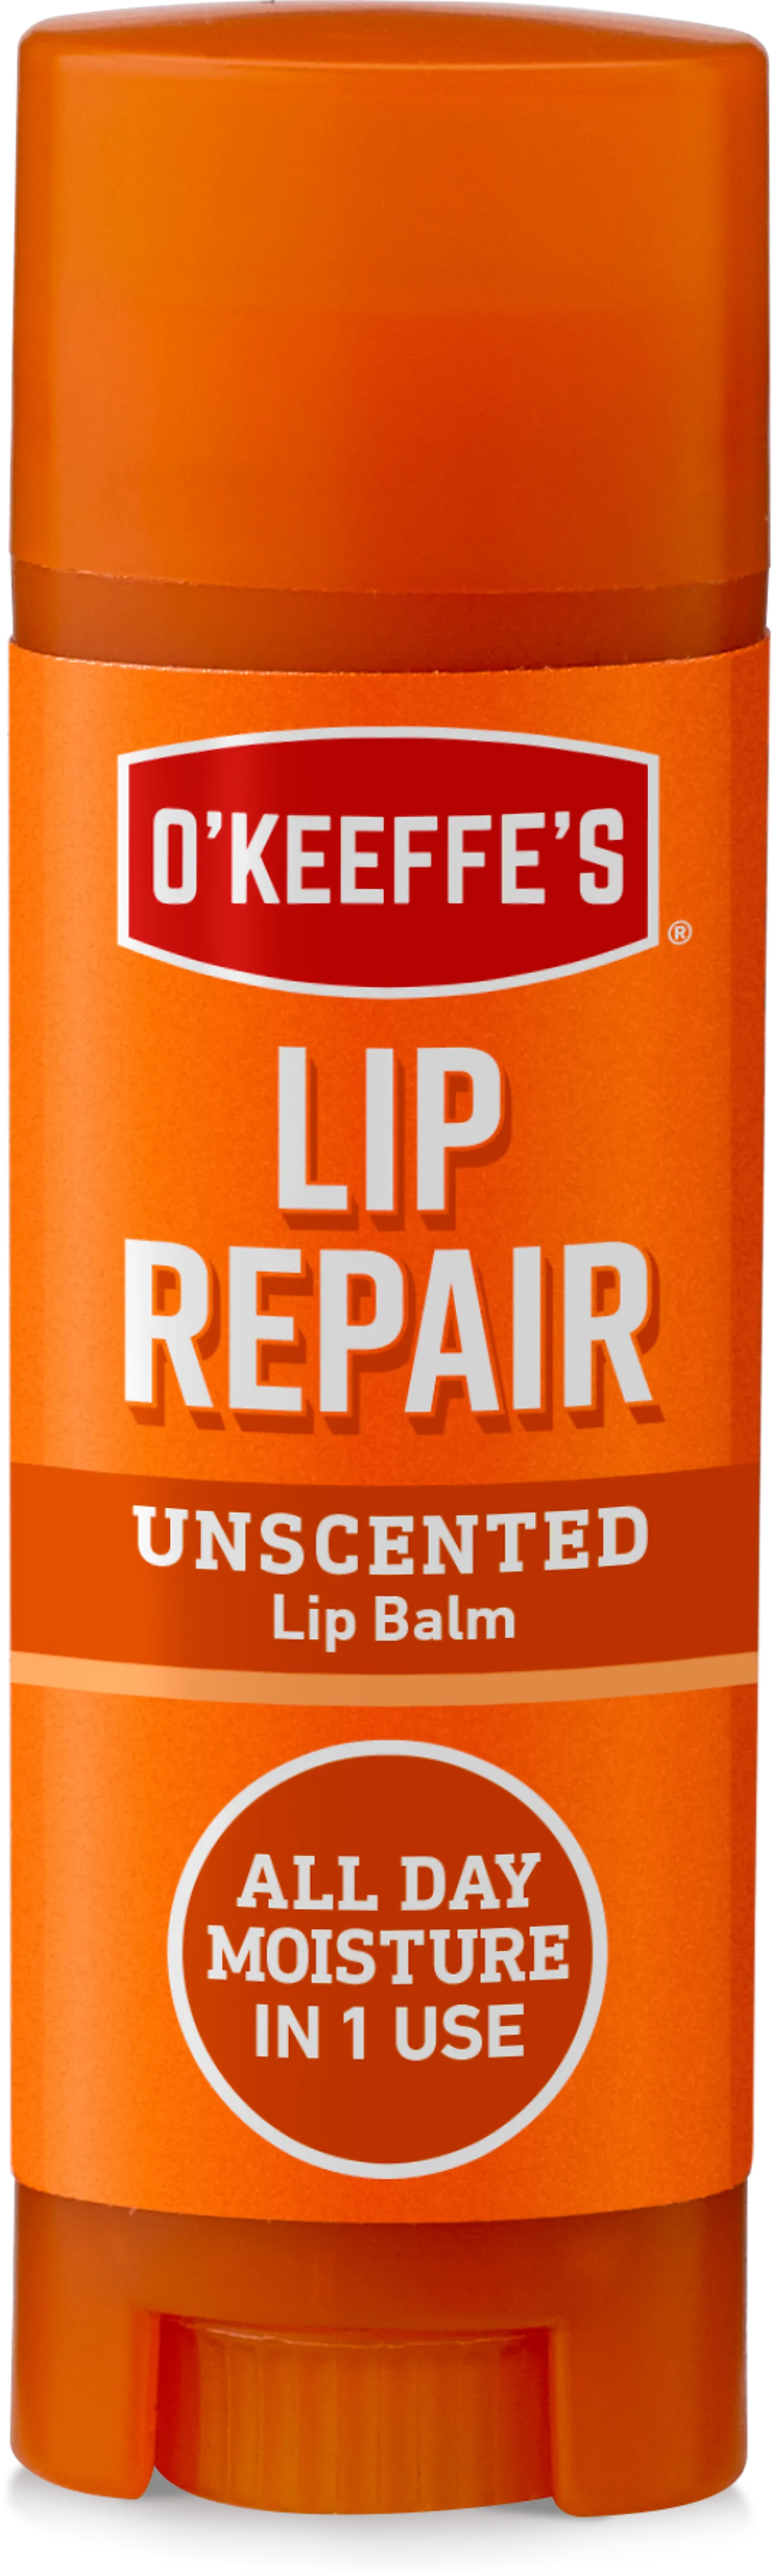 Leppepomade lip repair unscented 4,2 gram null - null - 2